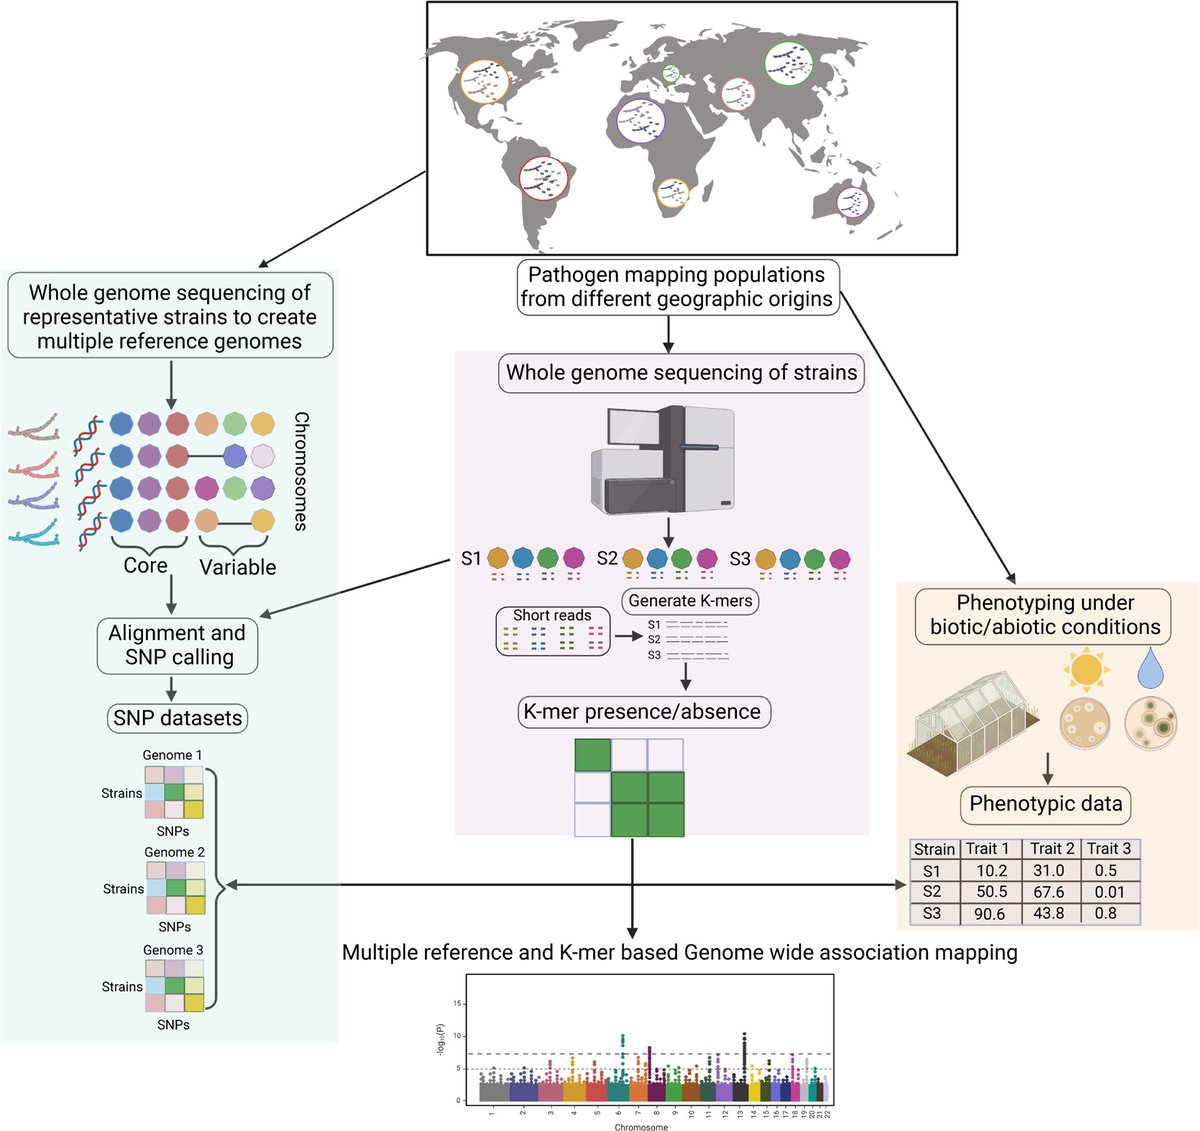 Using Zymoseptoria tritici as a case study, this resent article demonstrates the limitations of standard genome-wide association studies (GWAS) in capturing the full scope of loci influencing adaptive traits in microbial populations: plos.io/49NFoDs